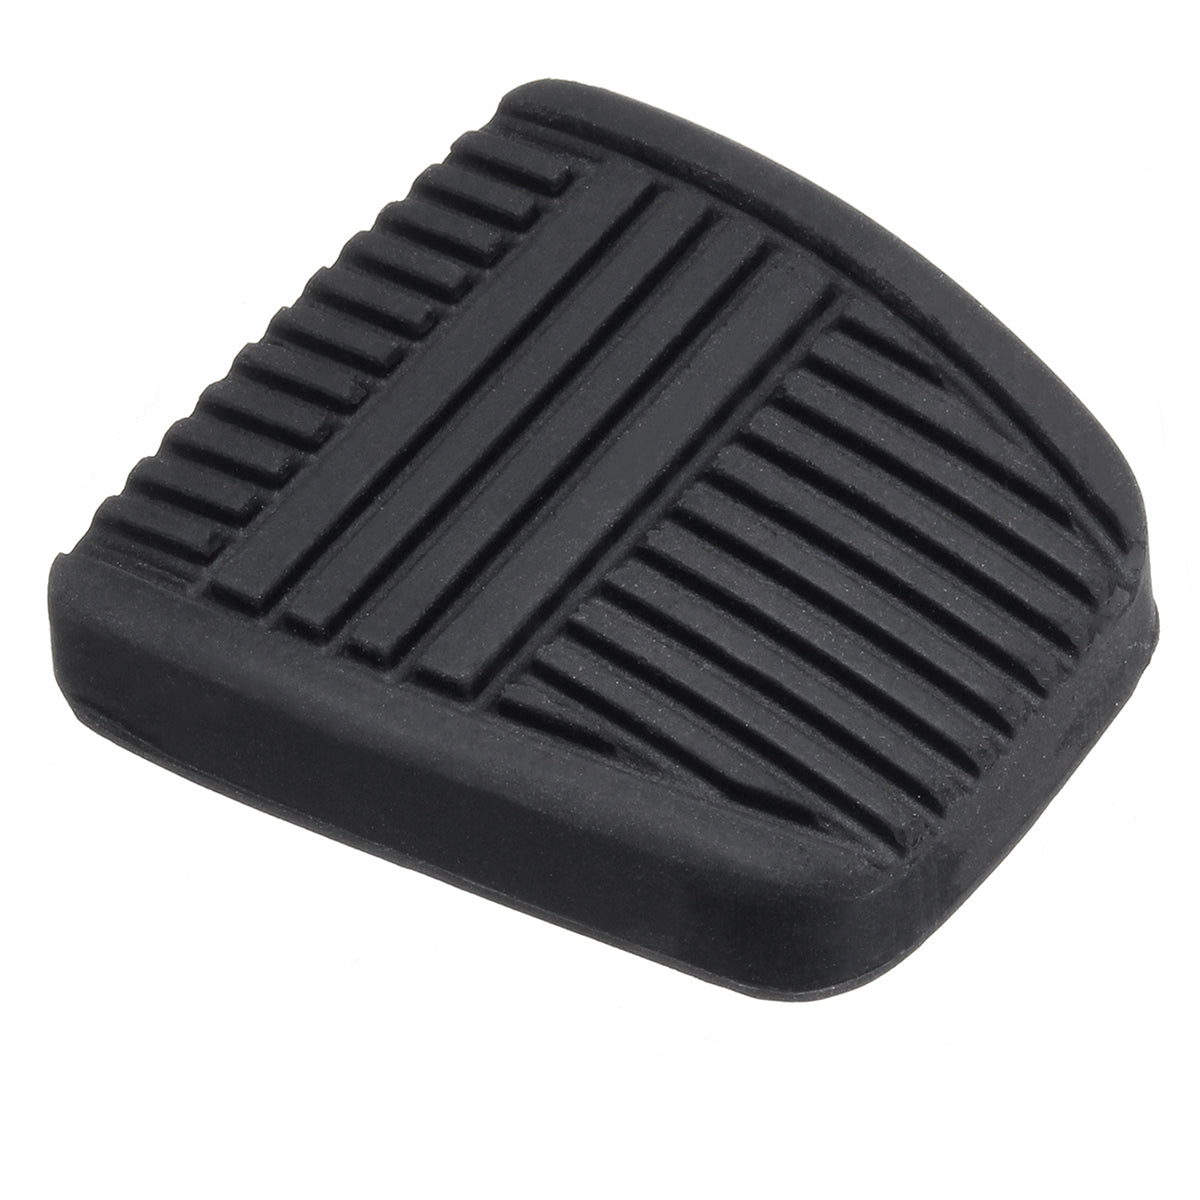 Black Brake Clutch Car Pedal Pad Rubber Cover Trans Vehicles For Toyota 31321-14020 - Auto GoShop